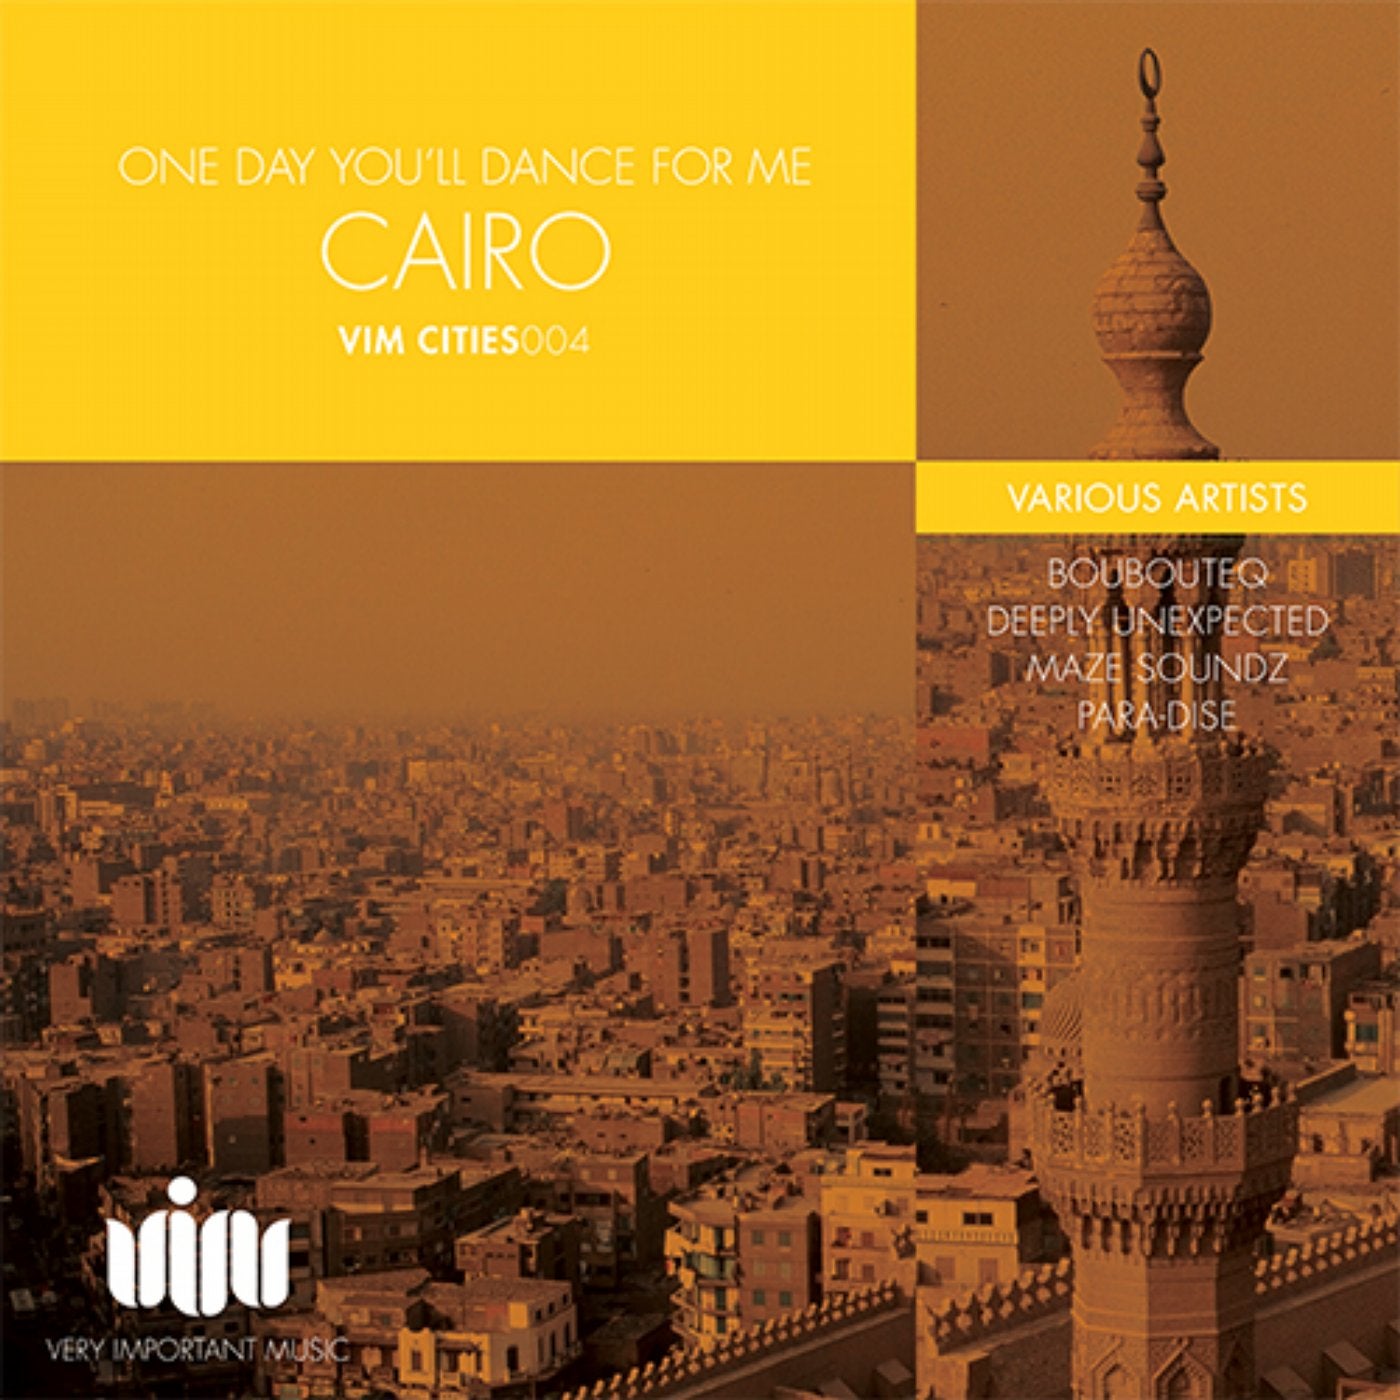 ONE DAY YOU'LL DANCE FOR ME CAIRO